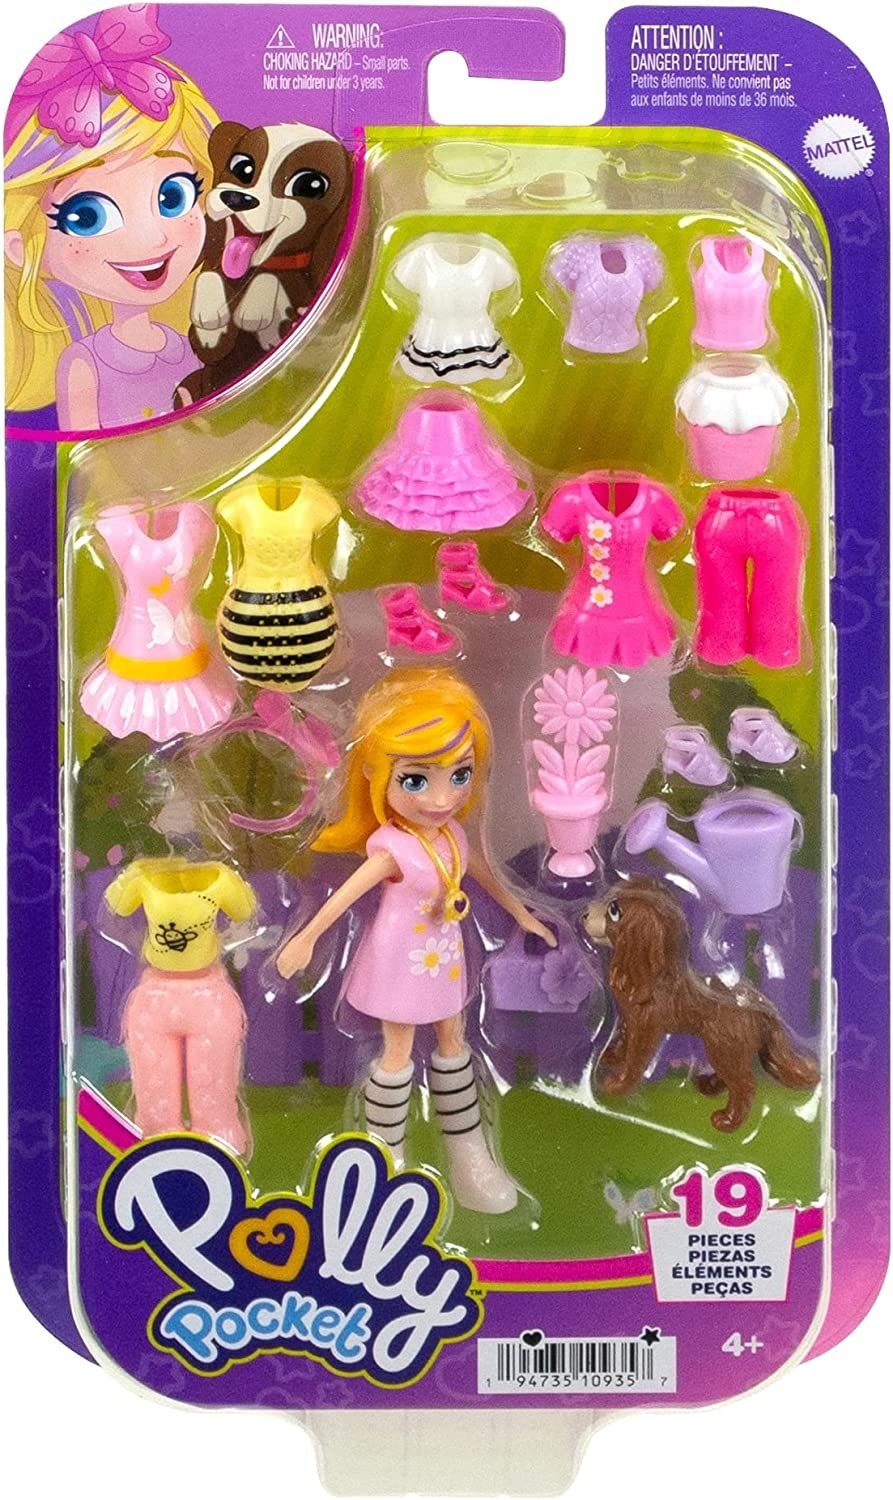 Explore the collection of Polly Pocket fashion packs, like this